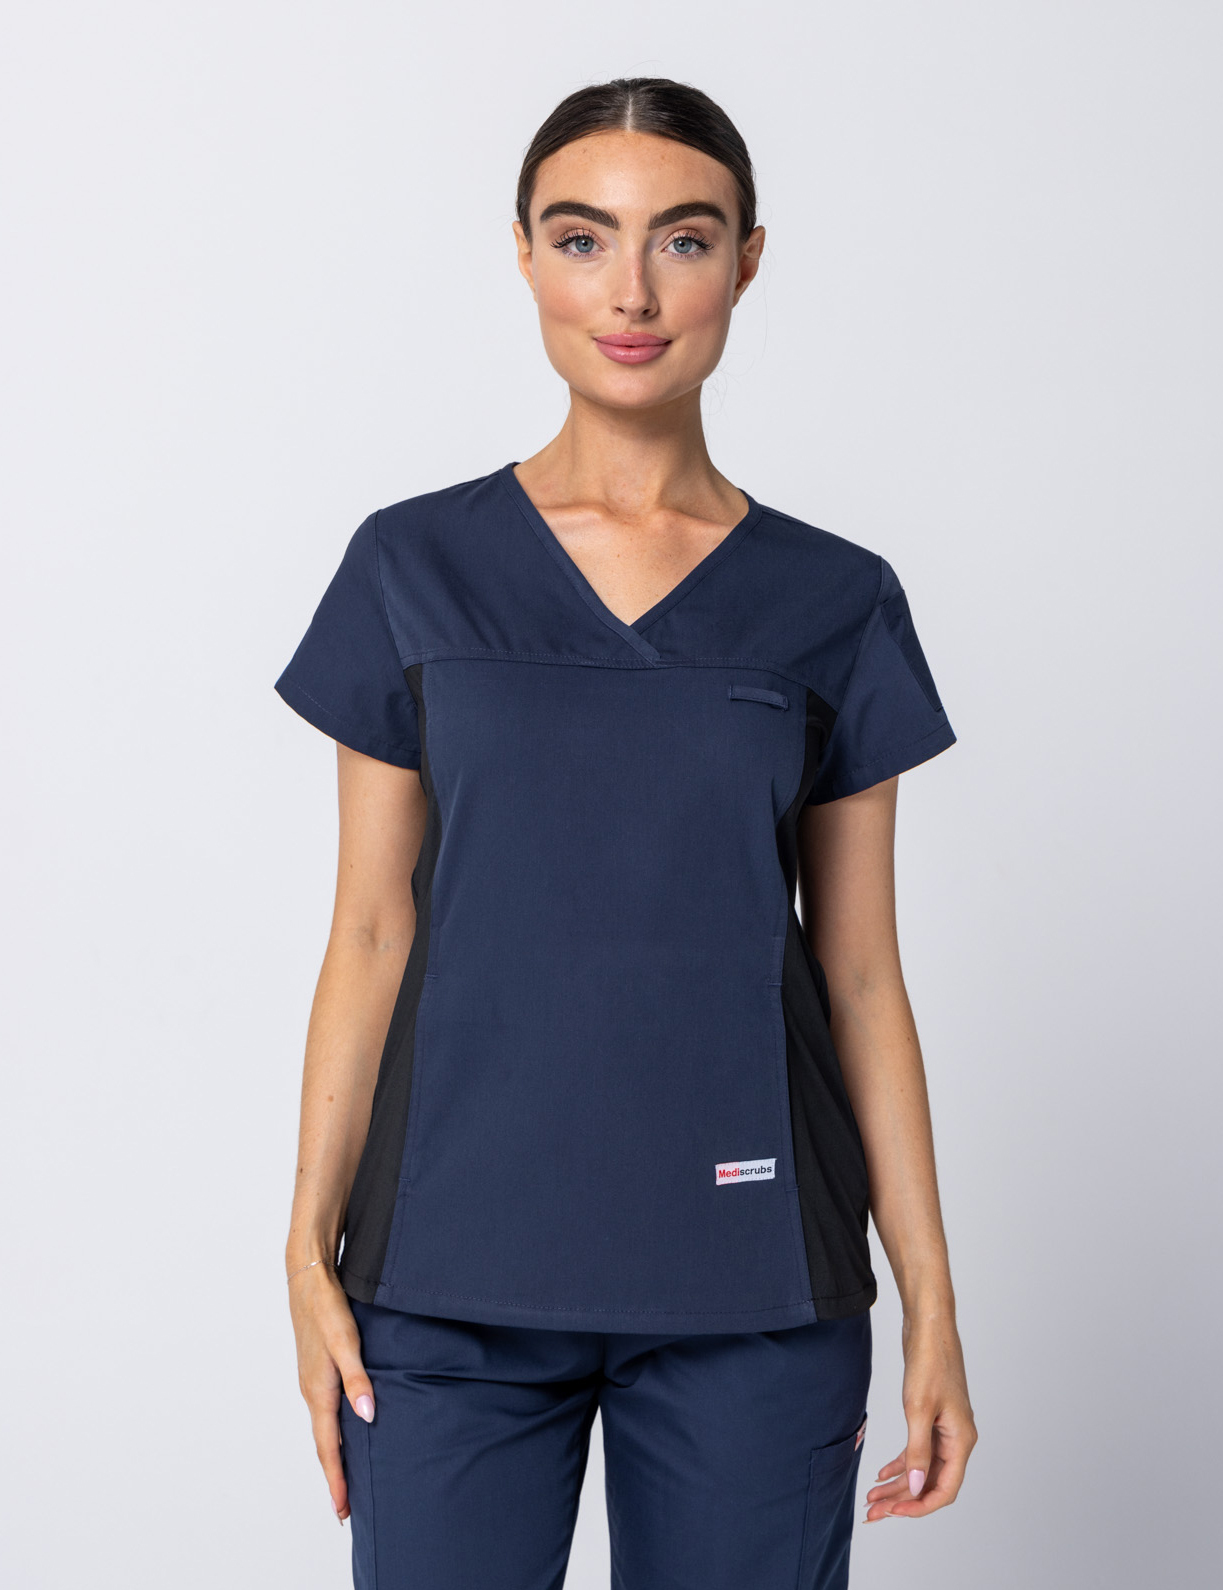 Women's Fit Solid Scrub Top With Spandex Panel - Navy - 5X Large